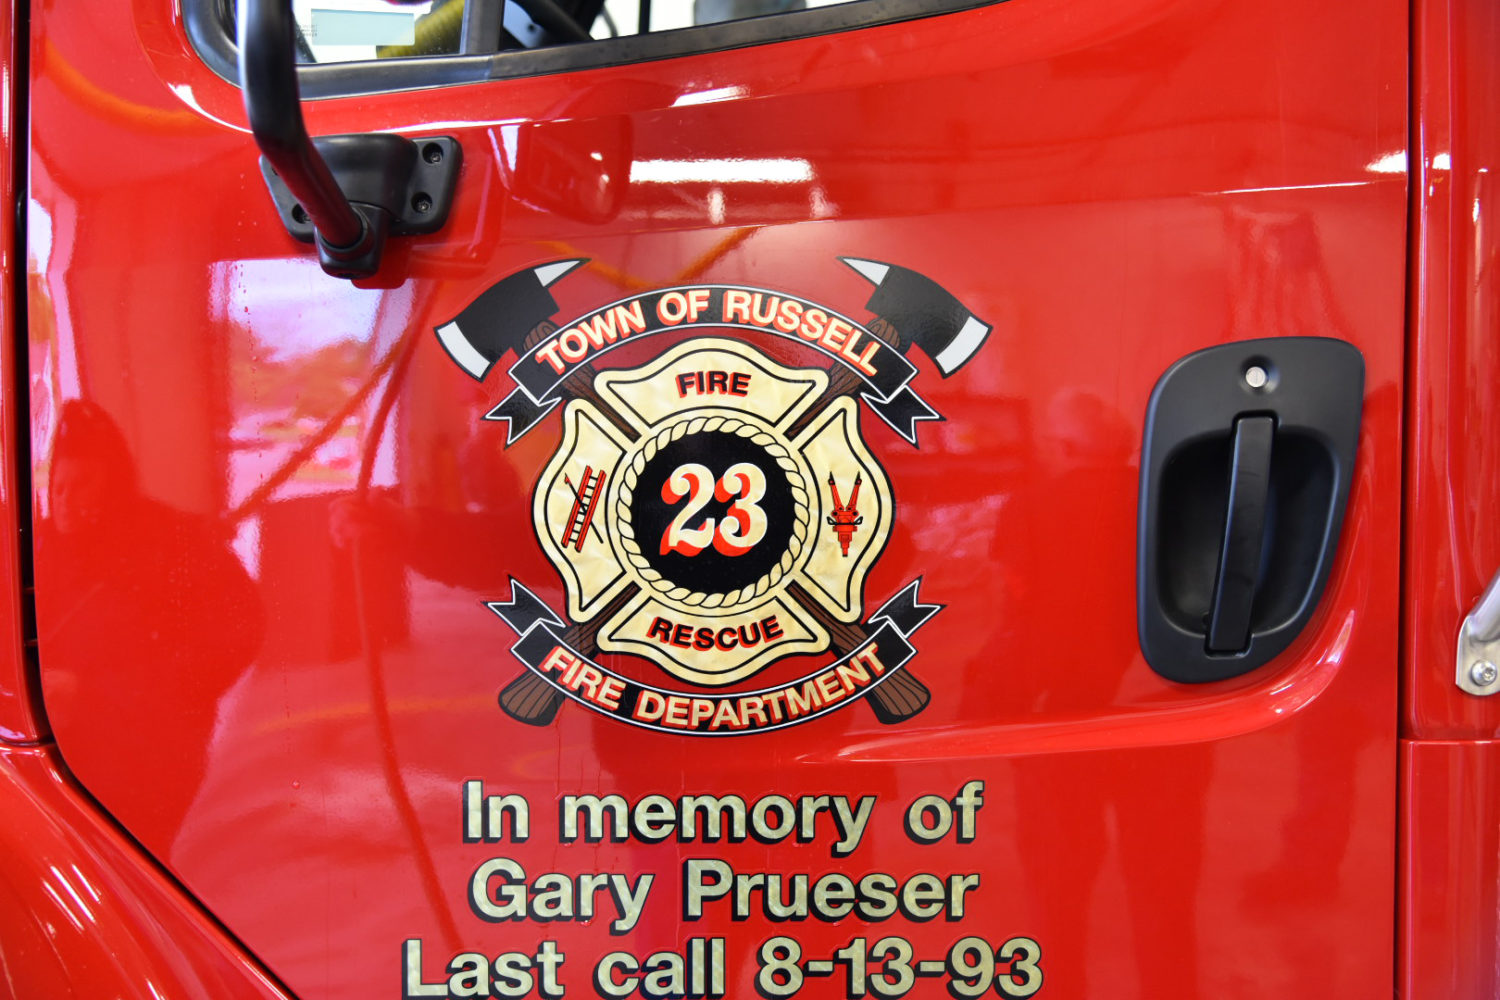 Town of Russell dedicates new Engine 4-23